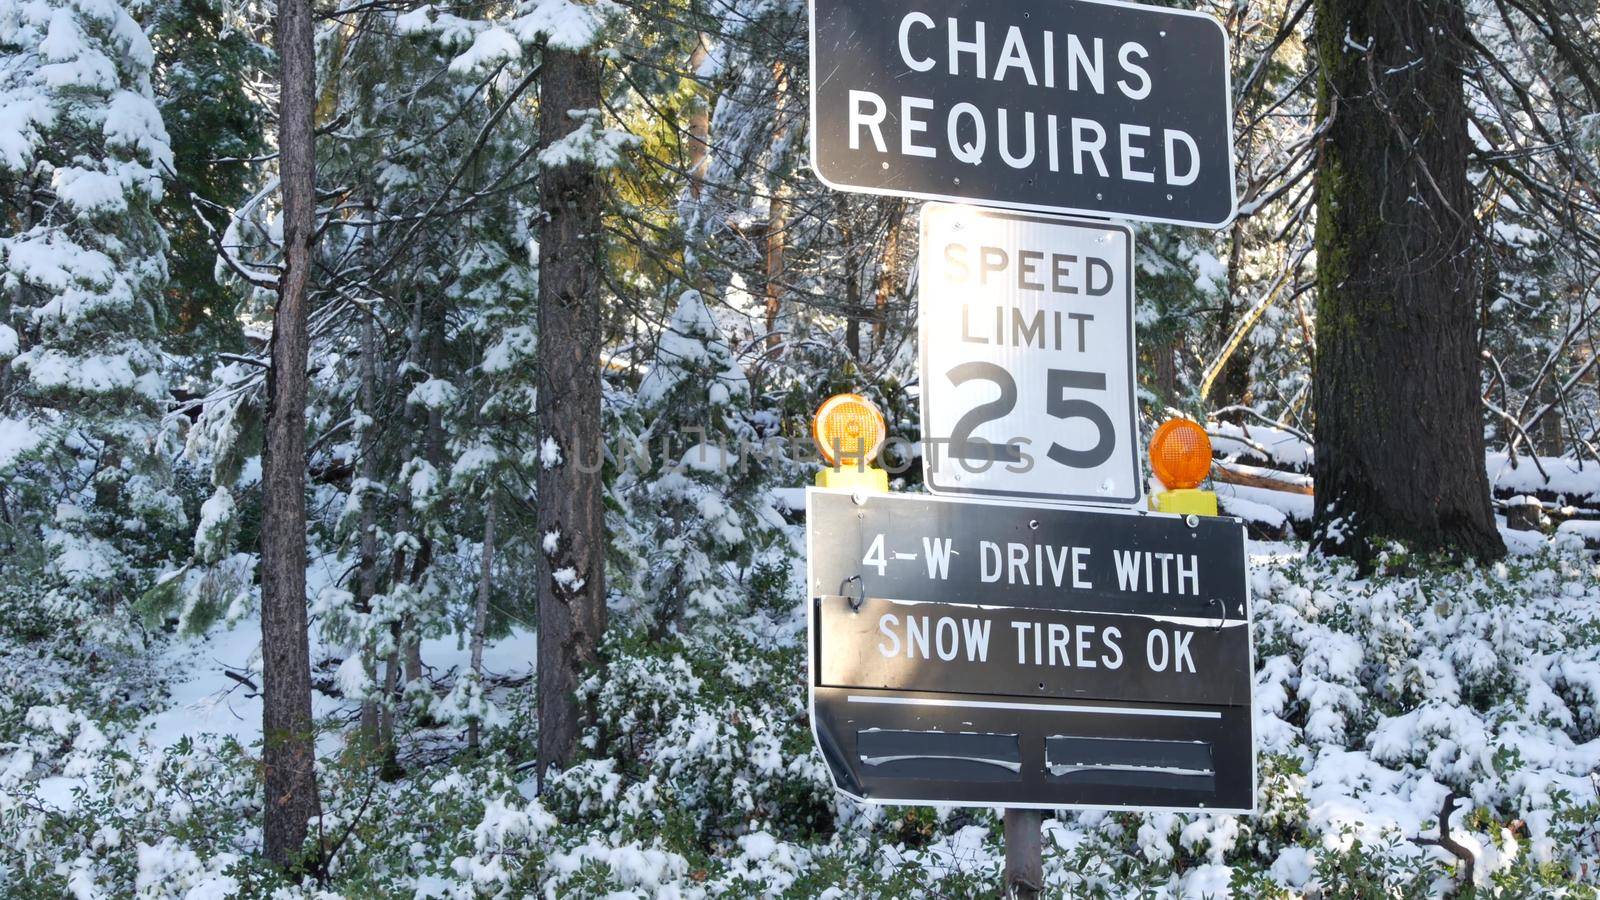 Chains or snow tires required road sign, Yosemite winter forest, California USA. by DogoraSun